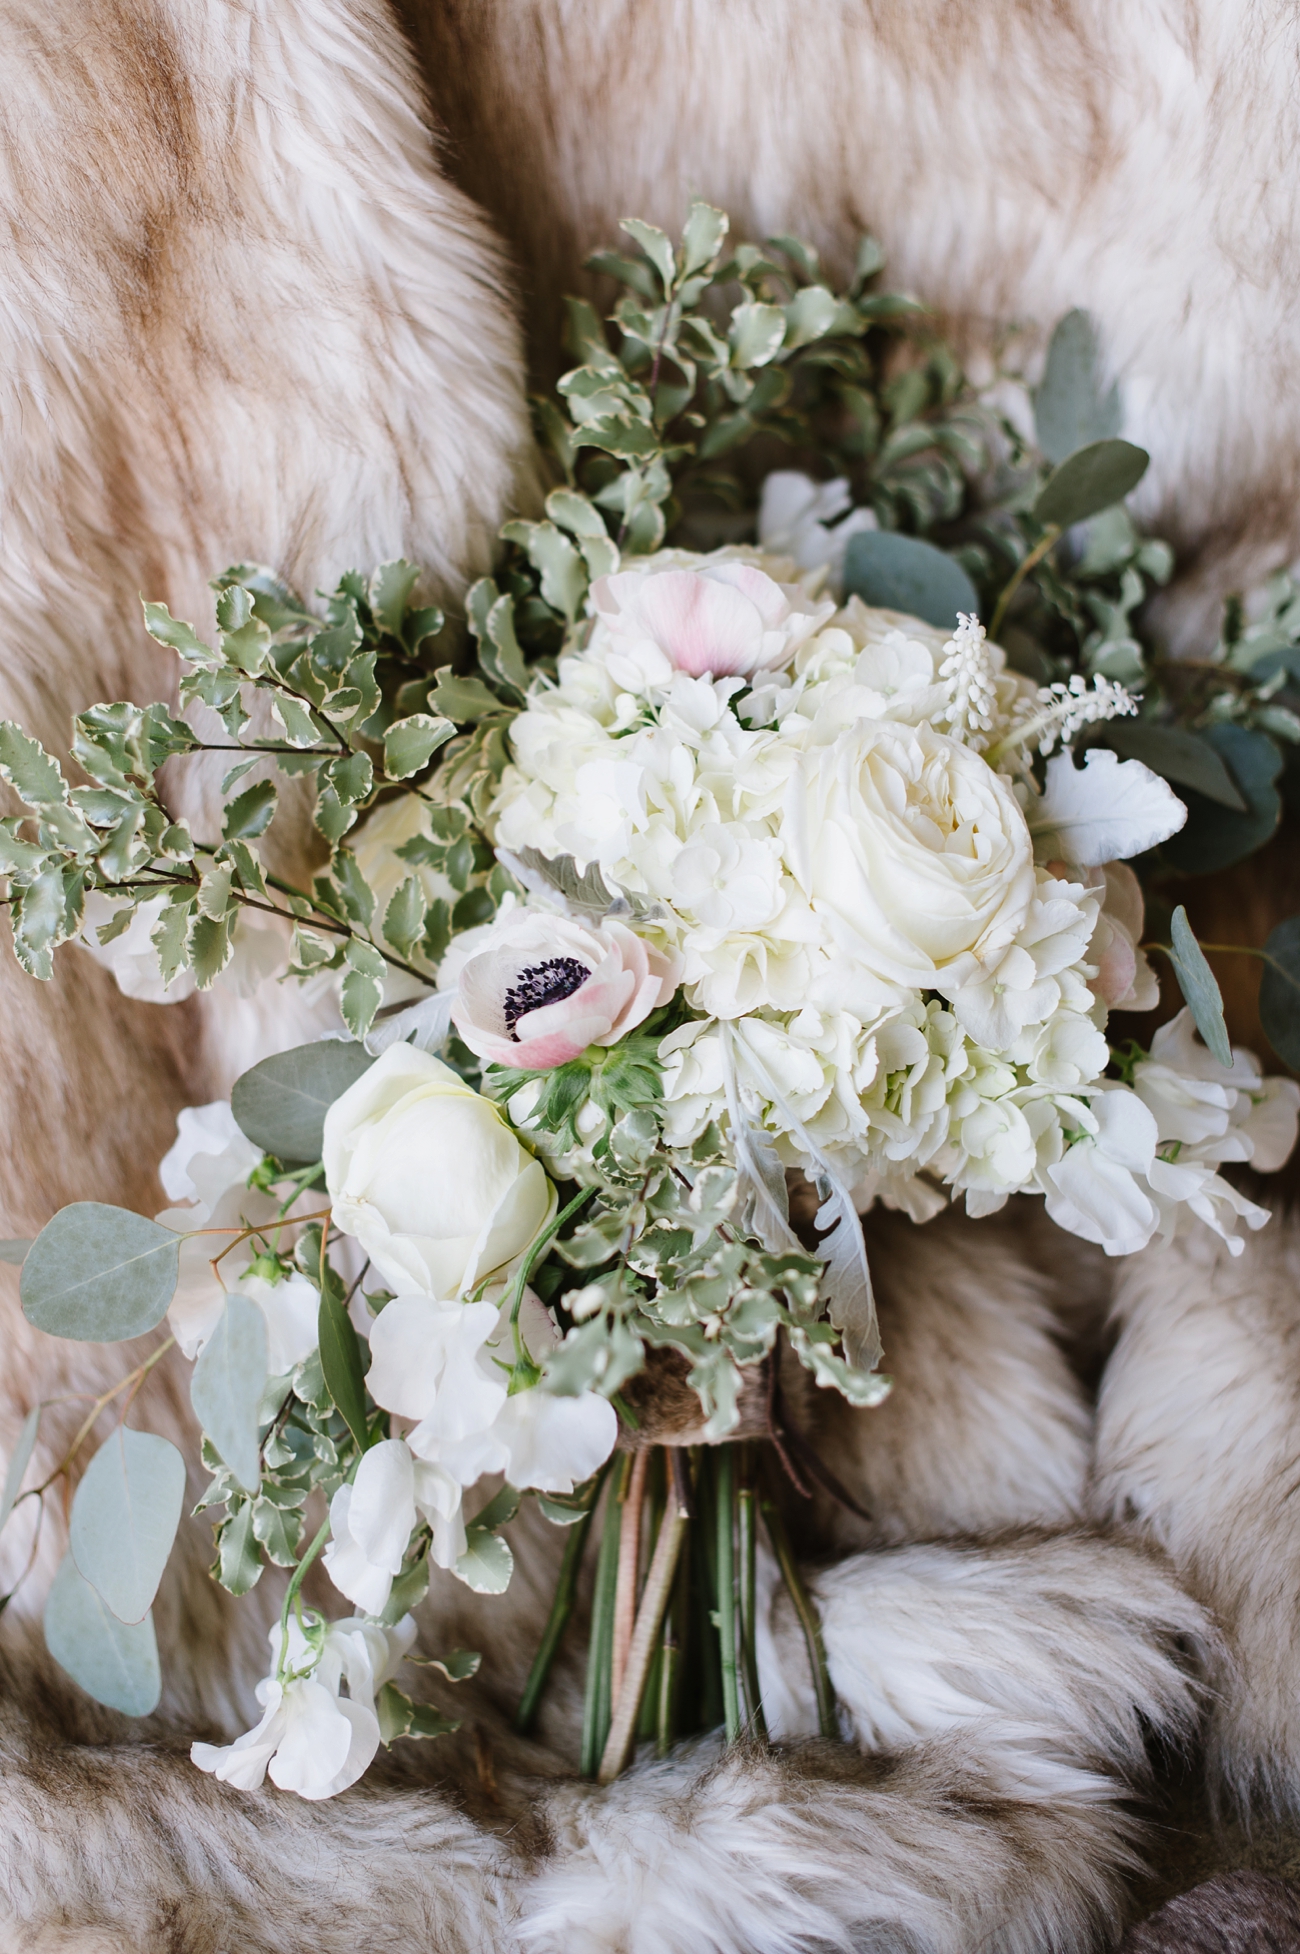 Elegant Winter Wedding Bouquet with Blush Anemones, Hydrangea, and Dusty Miller wrapped in Faux Fur | Natalie Franke Photography